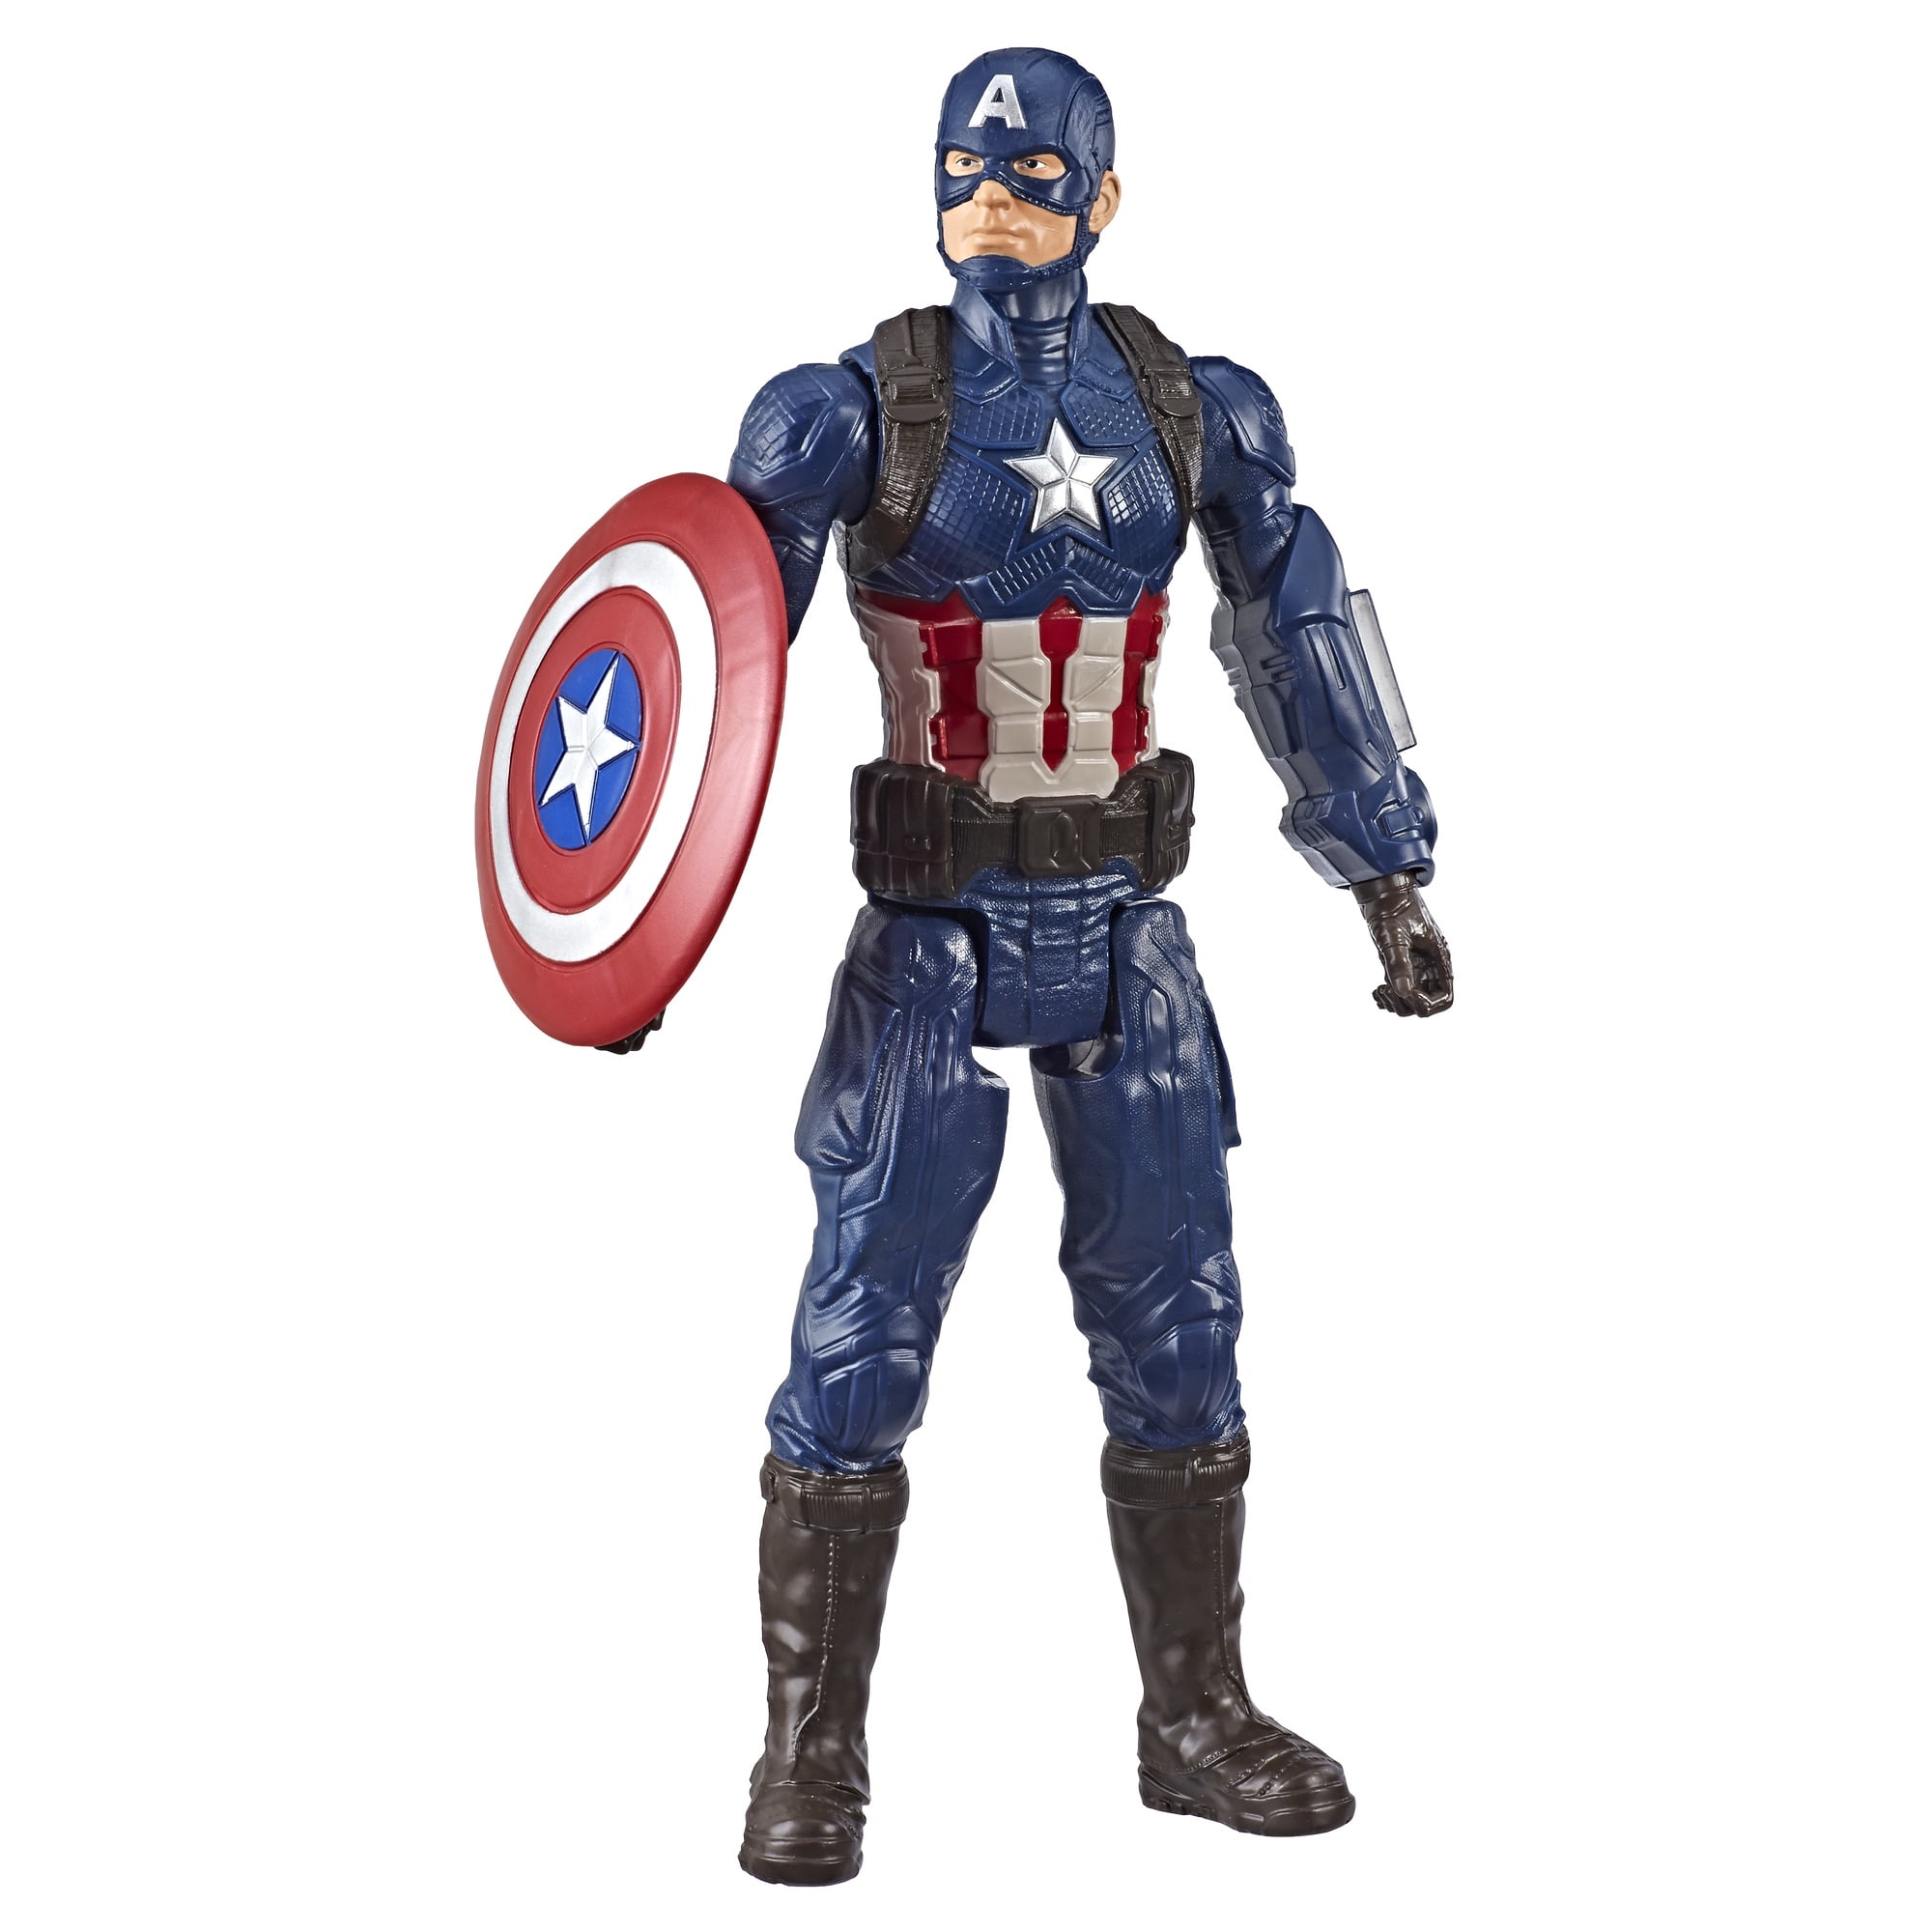 Avengers Captain America Shield Weapons Accessories For 6/'/' Figures Toys